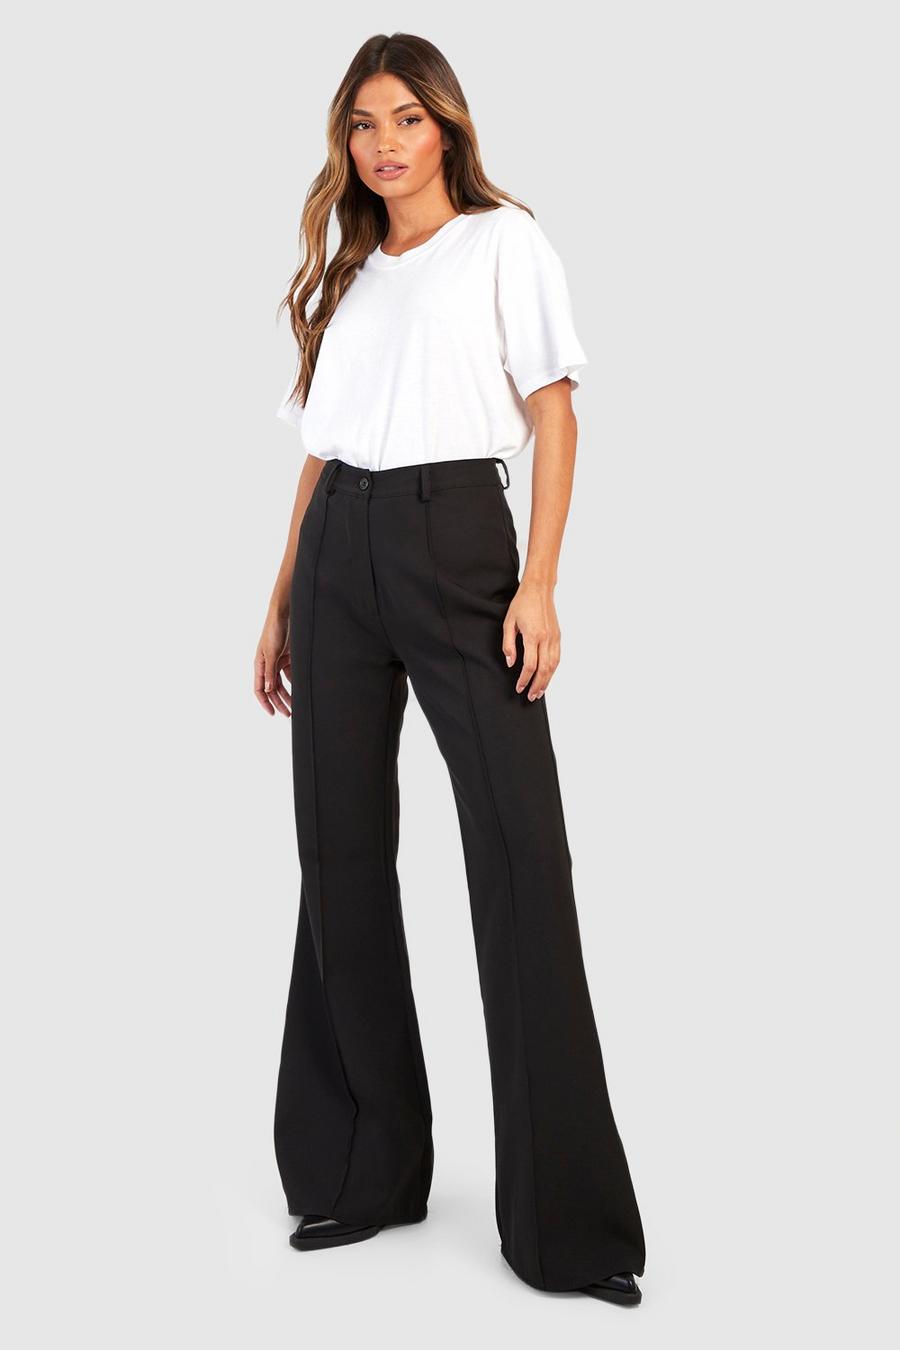 Black Woven Seam Detail Flare Trousers